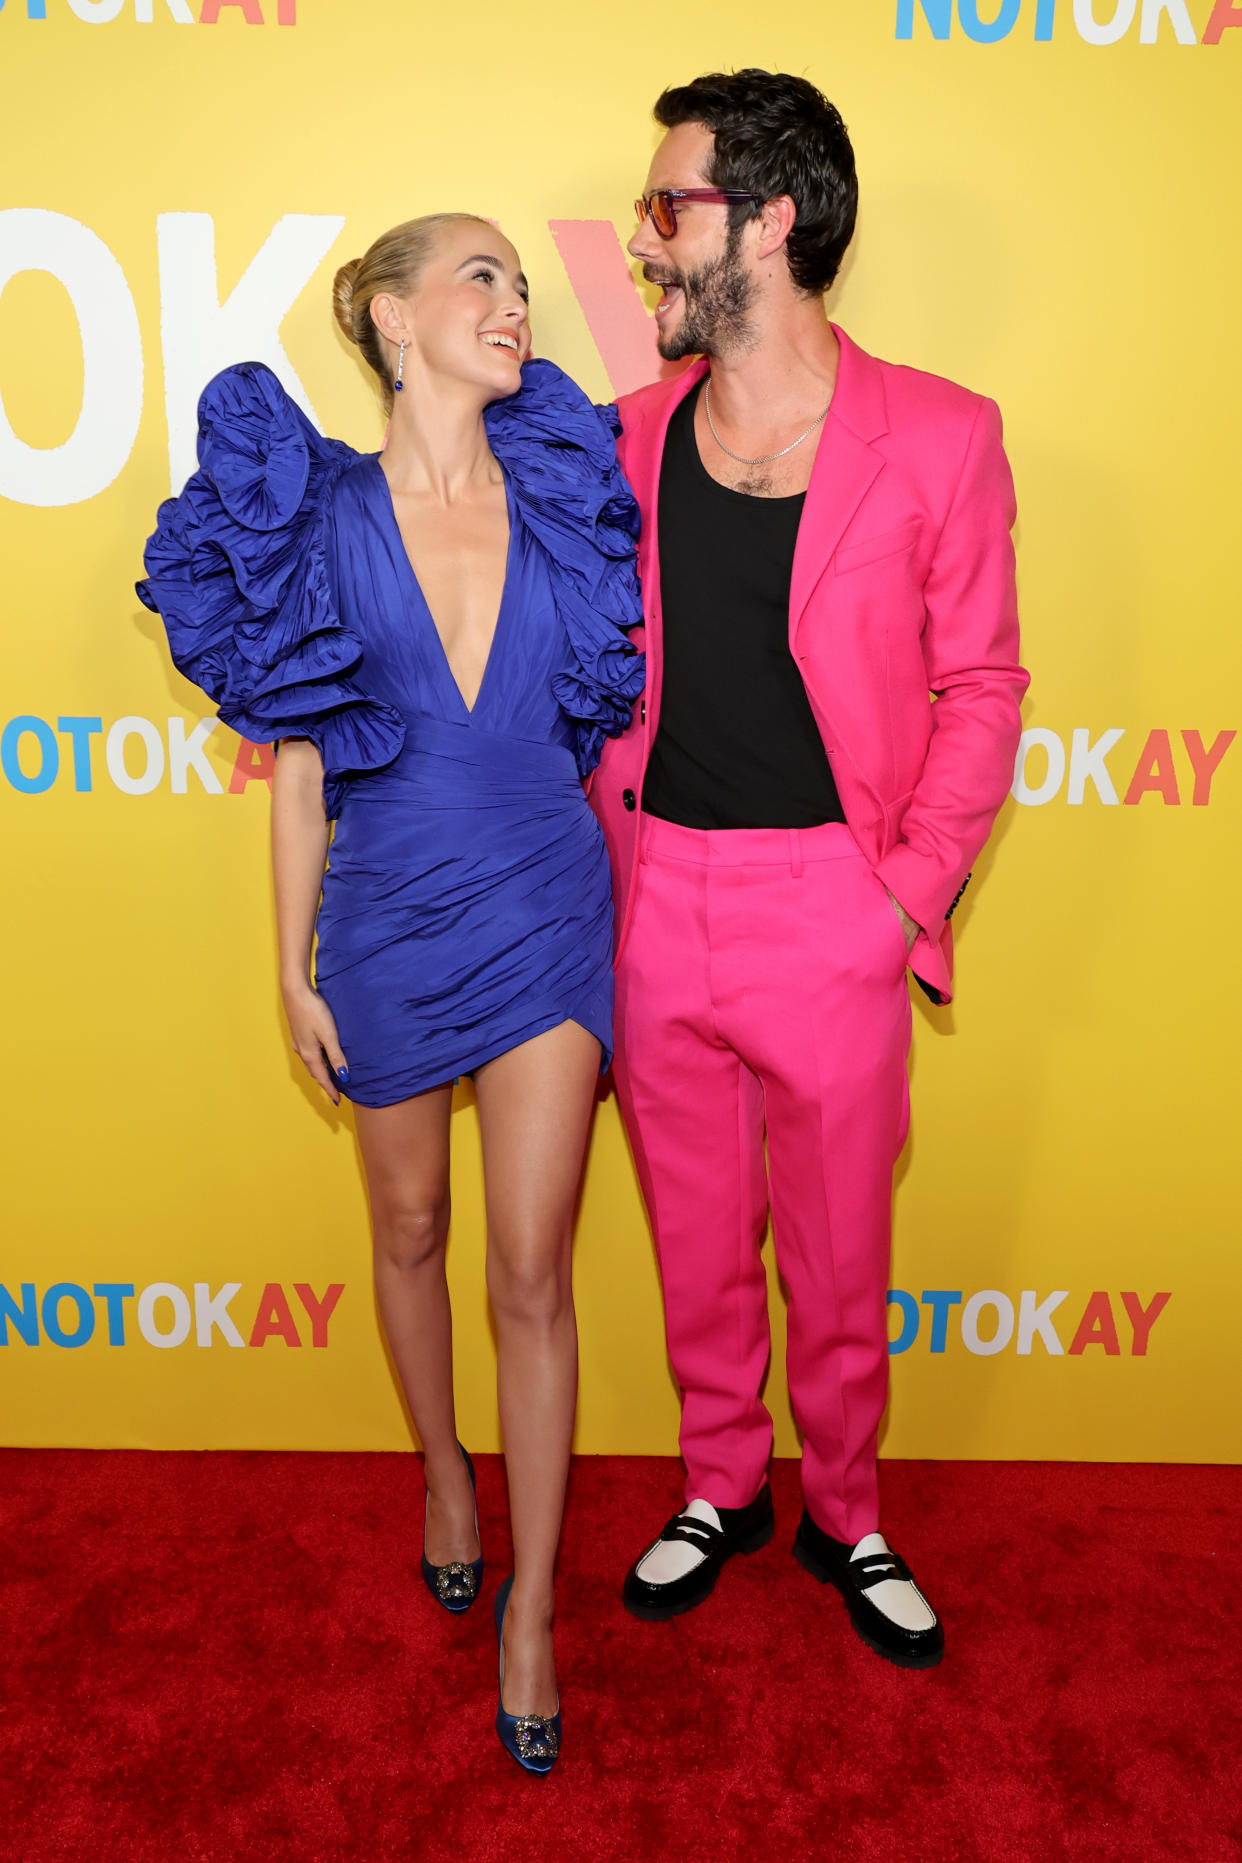 Zoey Deutch and Dylan O’Brien attend the “Not Okay” New York premiere at Angelika Film Center. - Credit: WireImage